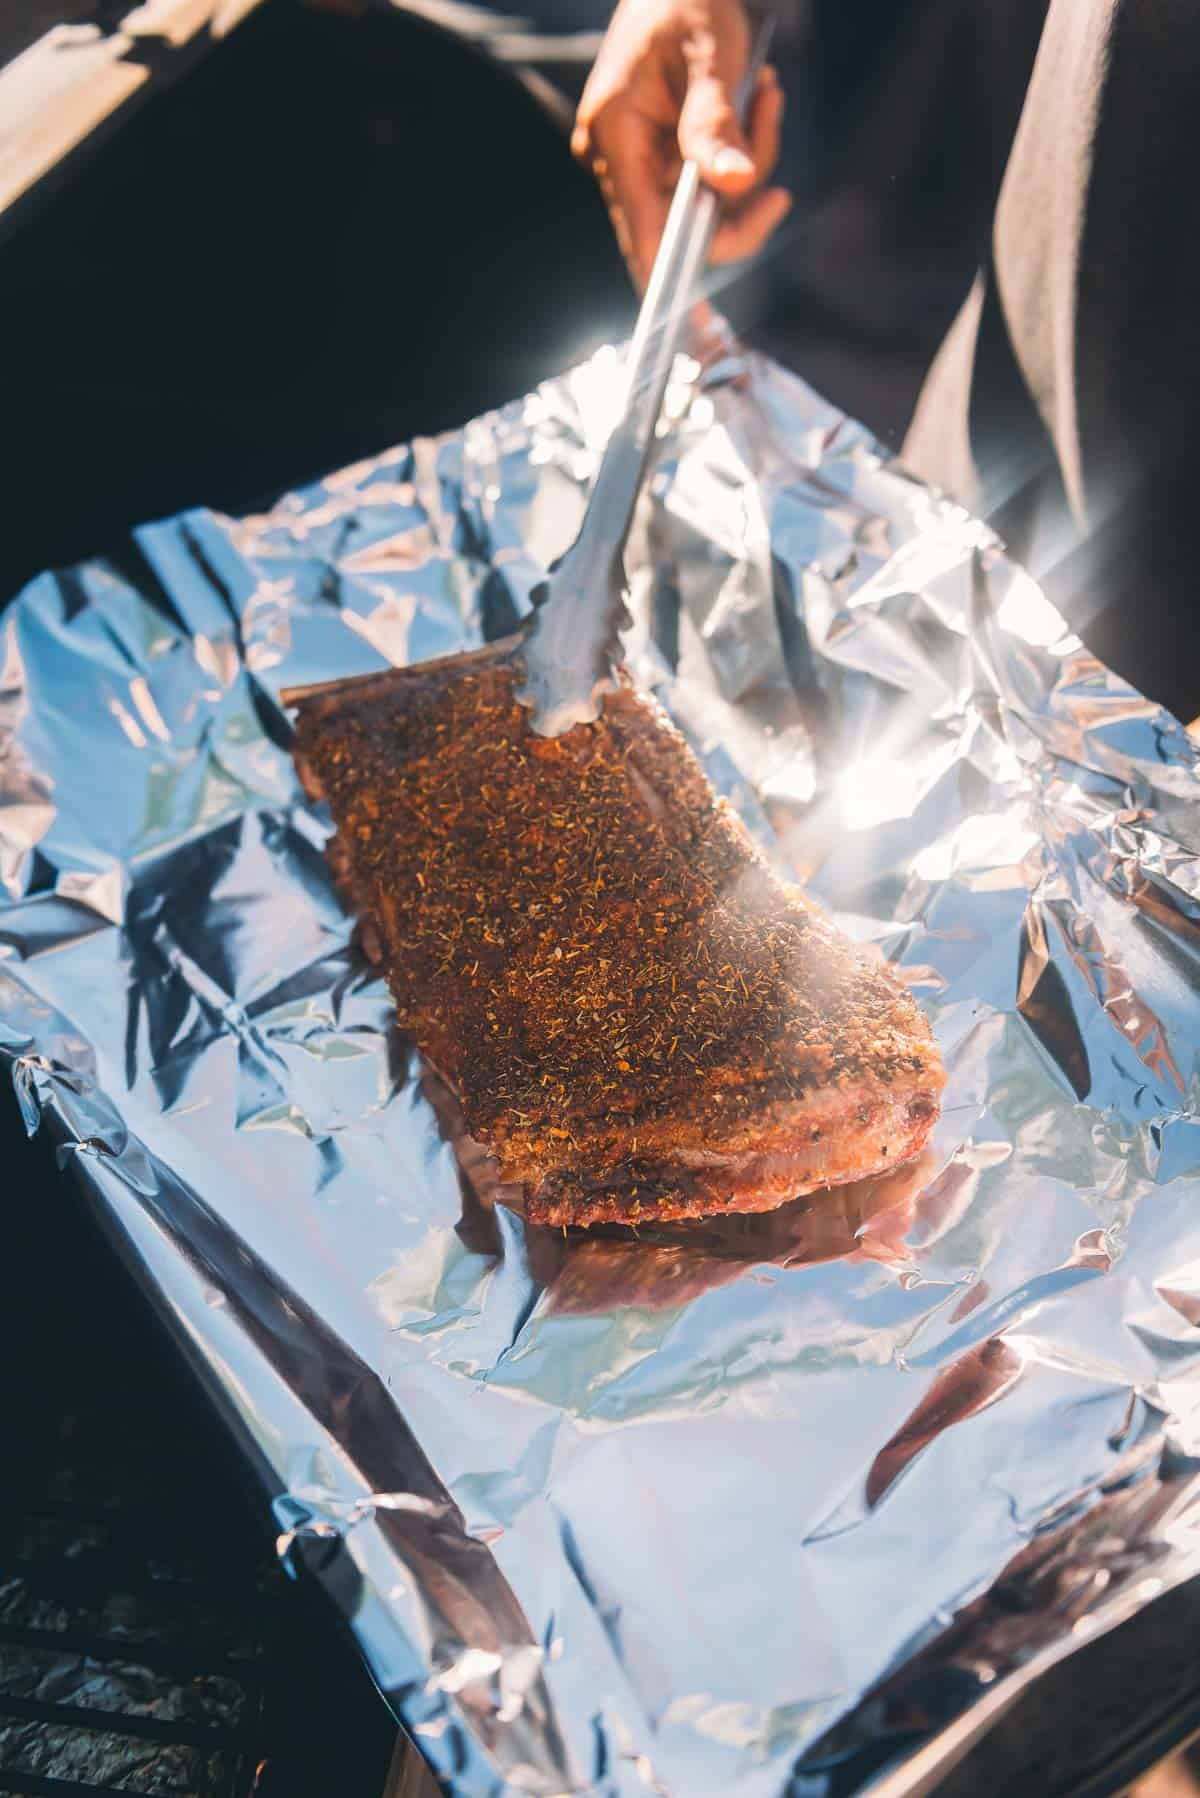 A person transferring a piece of meat on foil.